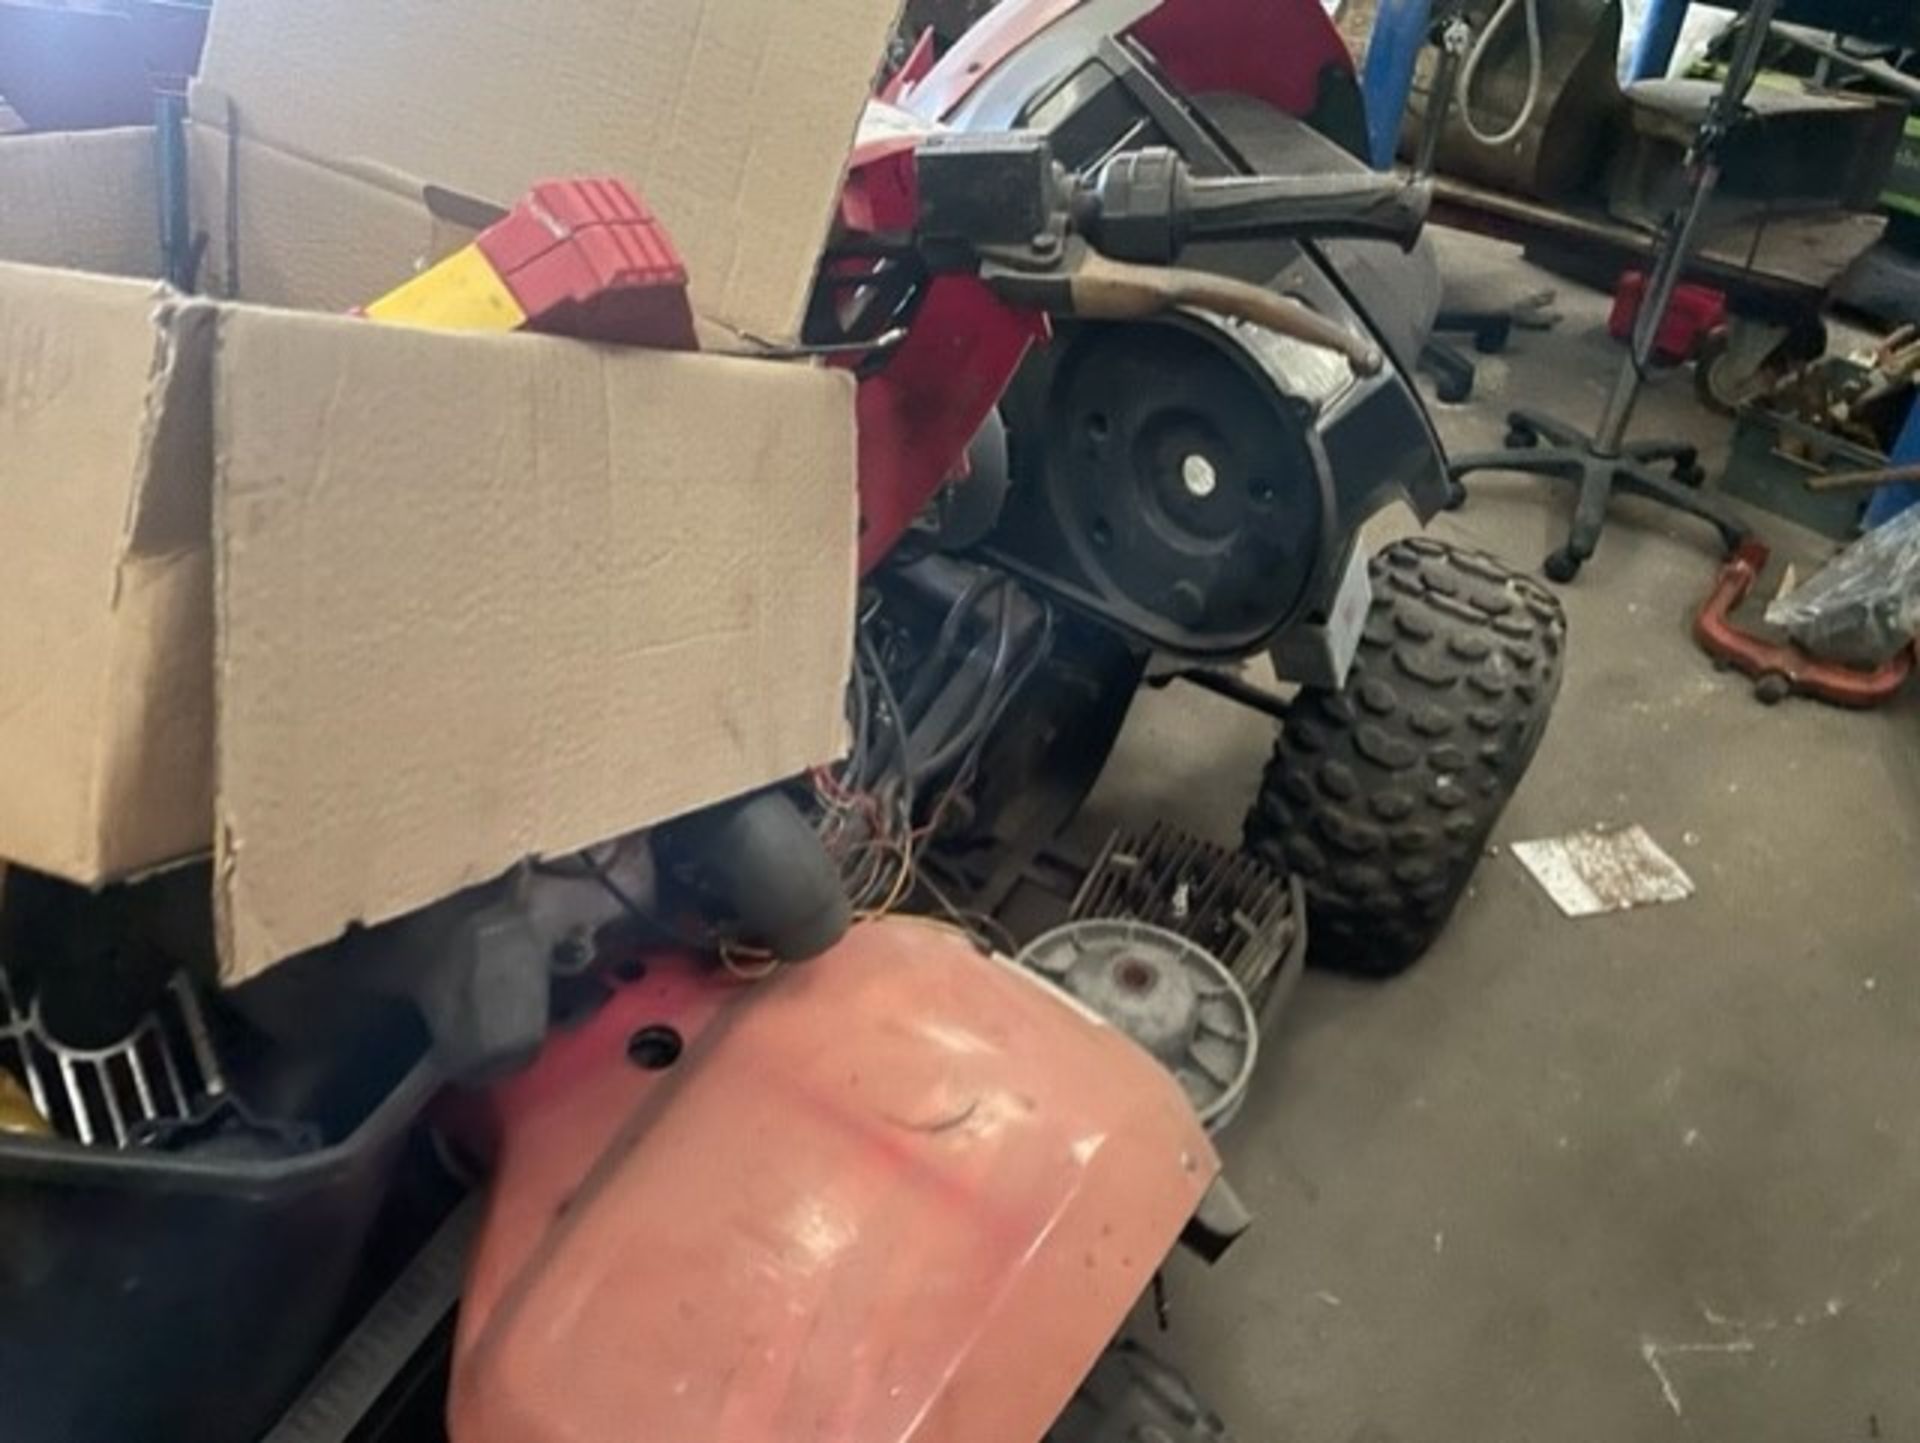 Polaris 250 2 stroke quad bike in bits as it needs a piston storey is I bought a piston but the - Image 2 of 7